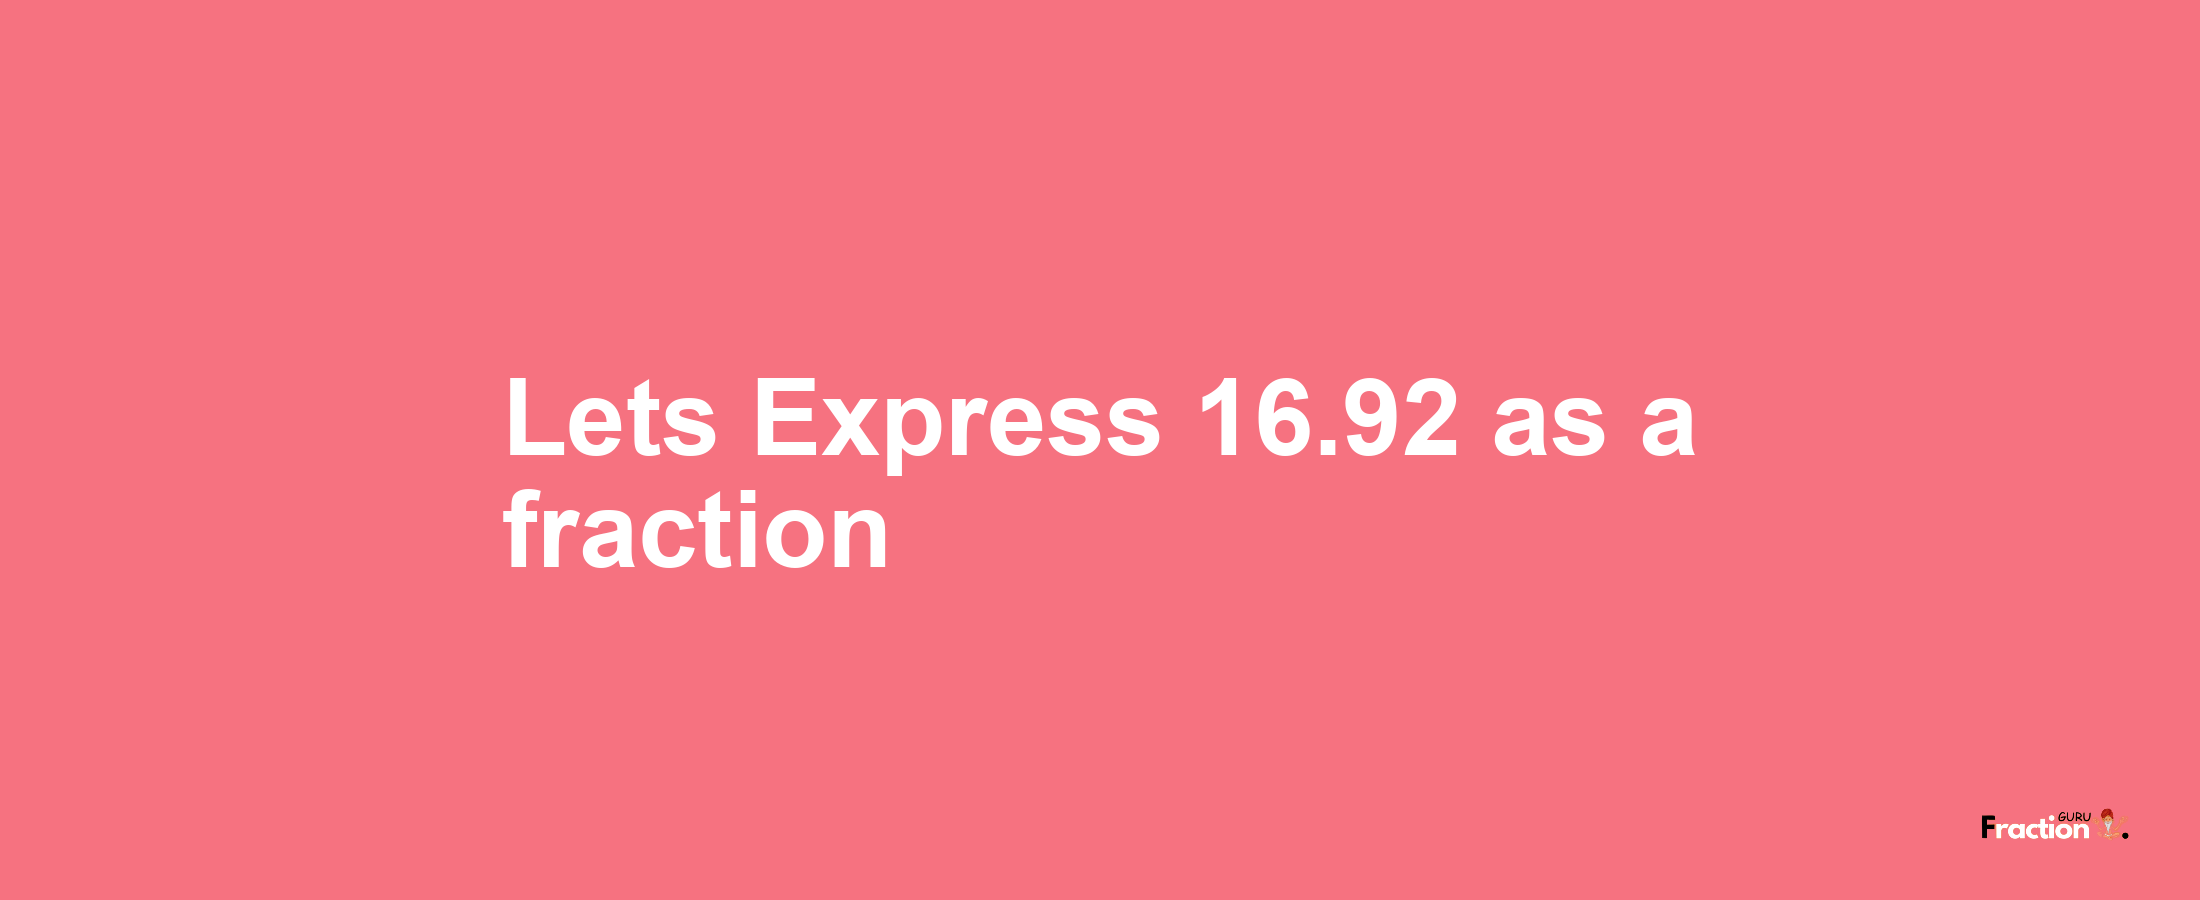 Lets Express 16.92 as afraction